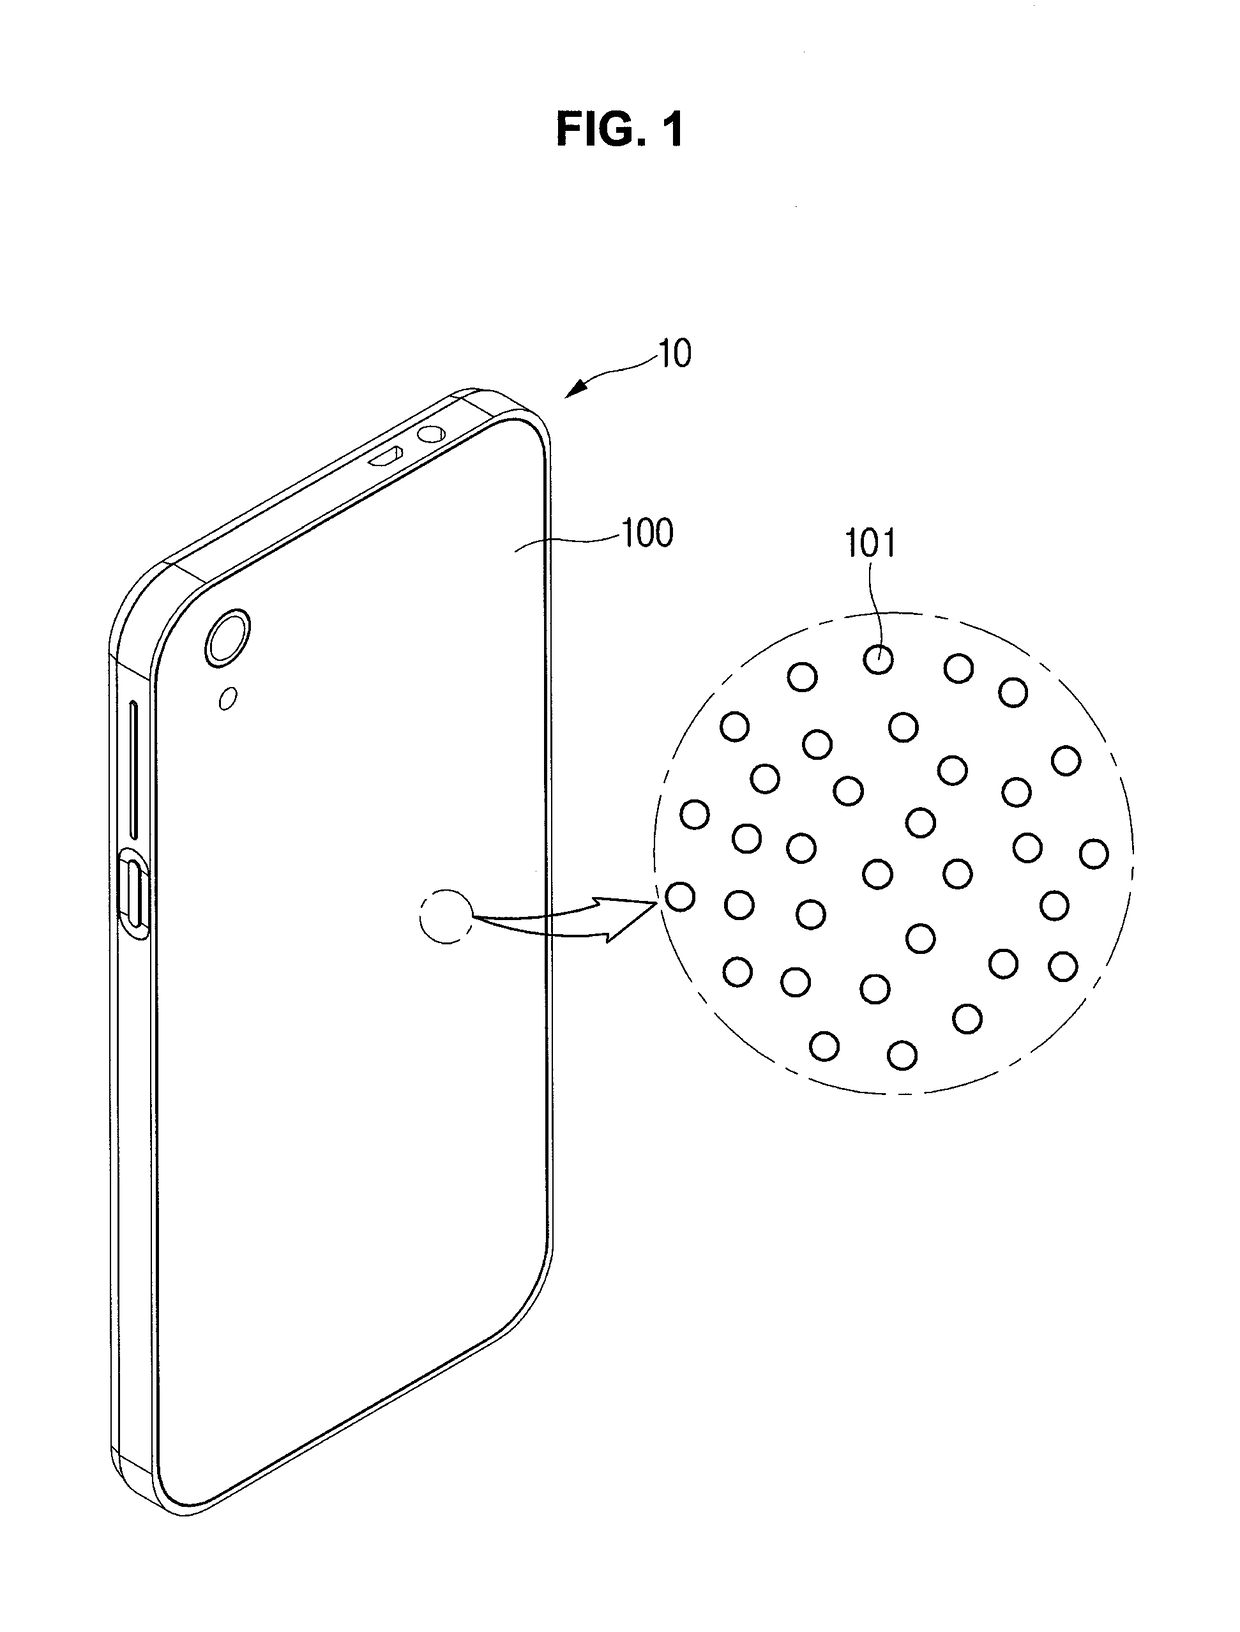 Metal frame for device being equipped with wireless charging transmitter or receiver